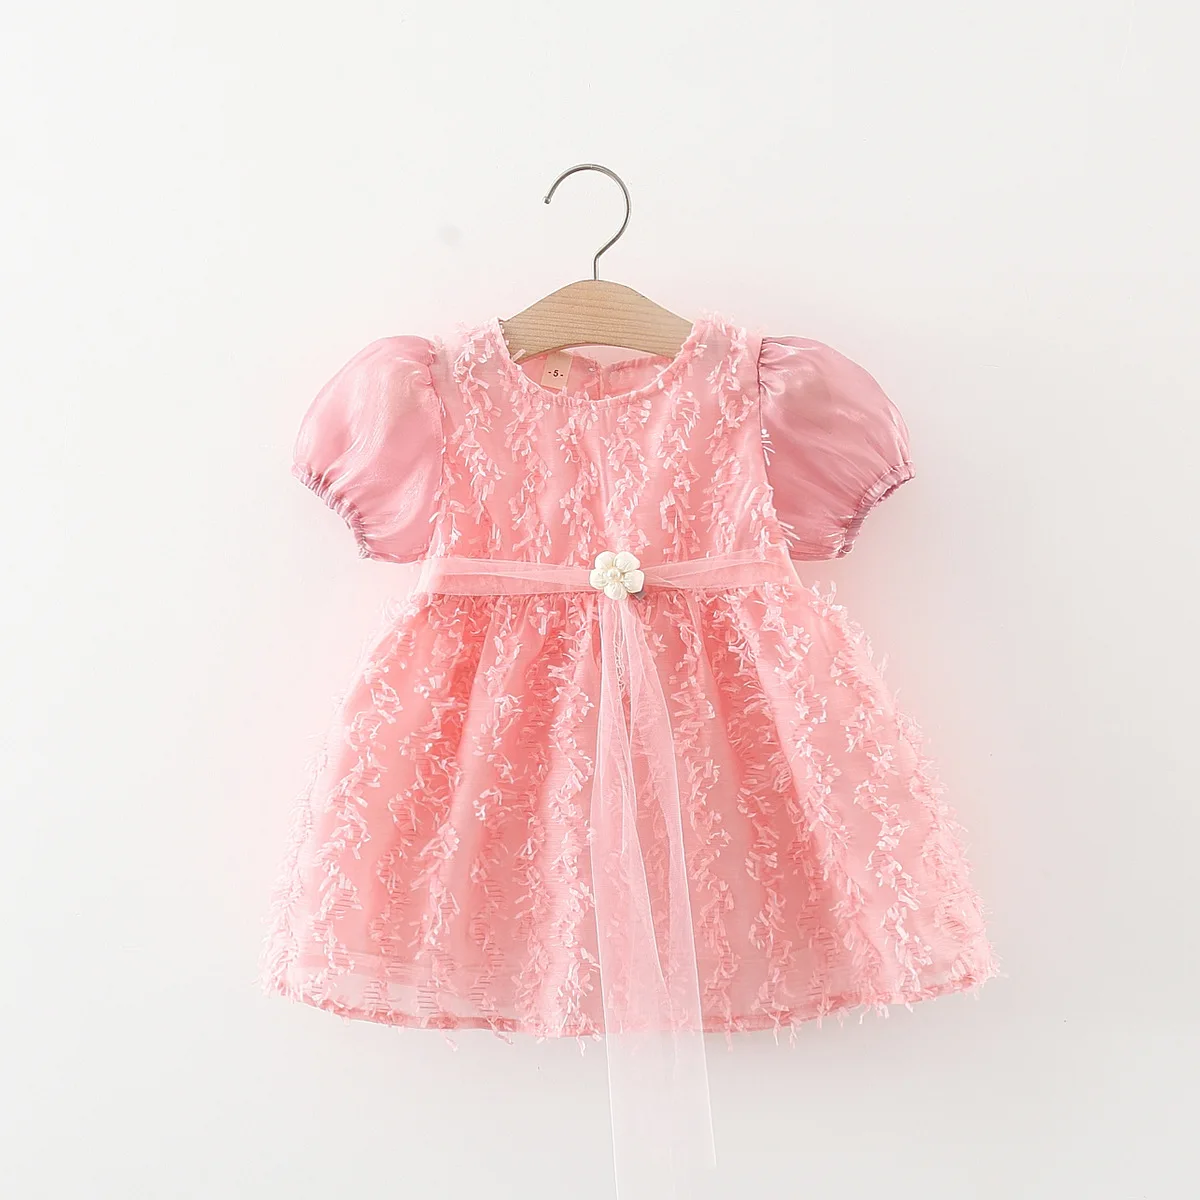 Flower newborn baby dress new summer cute baby girl dress tulle lace baby birthday party dress 1-3 year old Tutu dress toddler